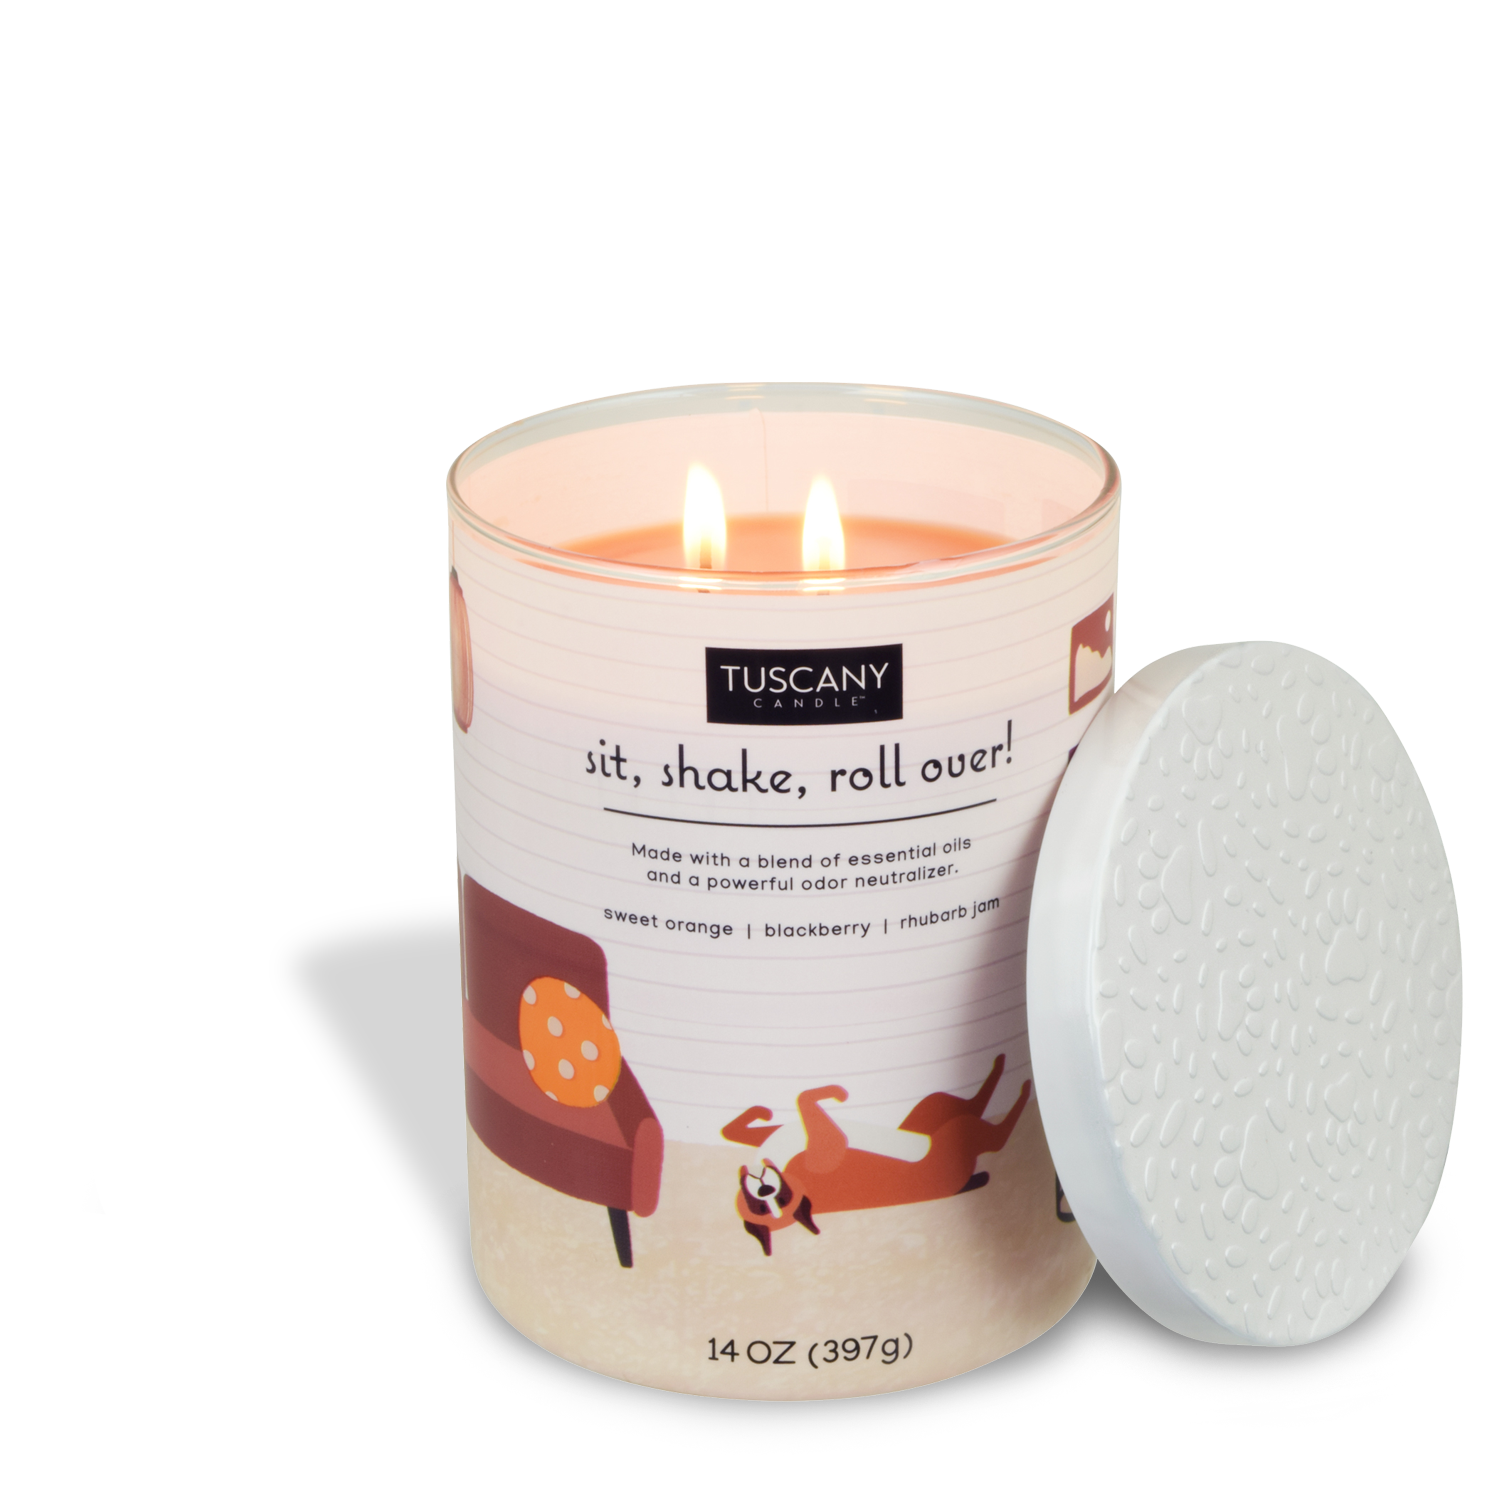 Tuscany Candle specializes in pet odor control for pet-owning households, offering a Sit, Shake, Roll Over Scented Jar Candle with unique fragrance notes.